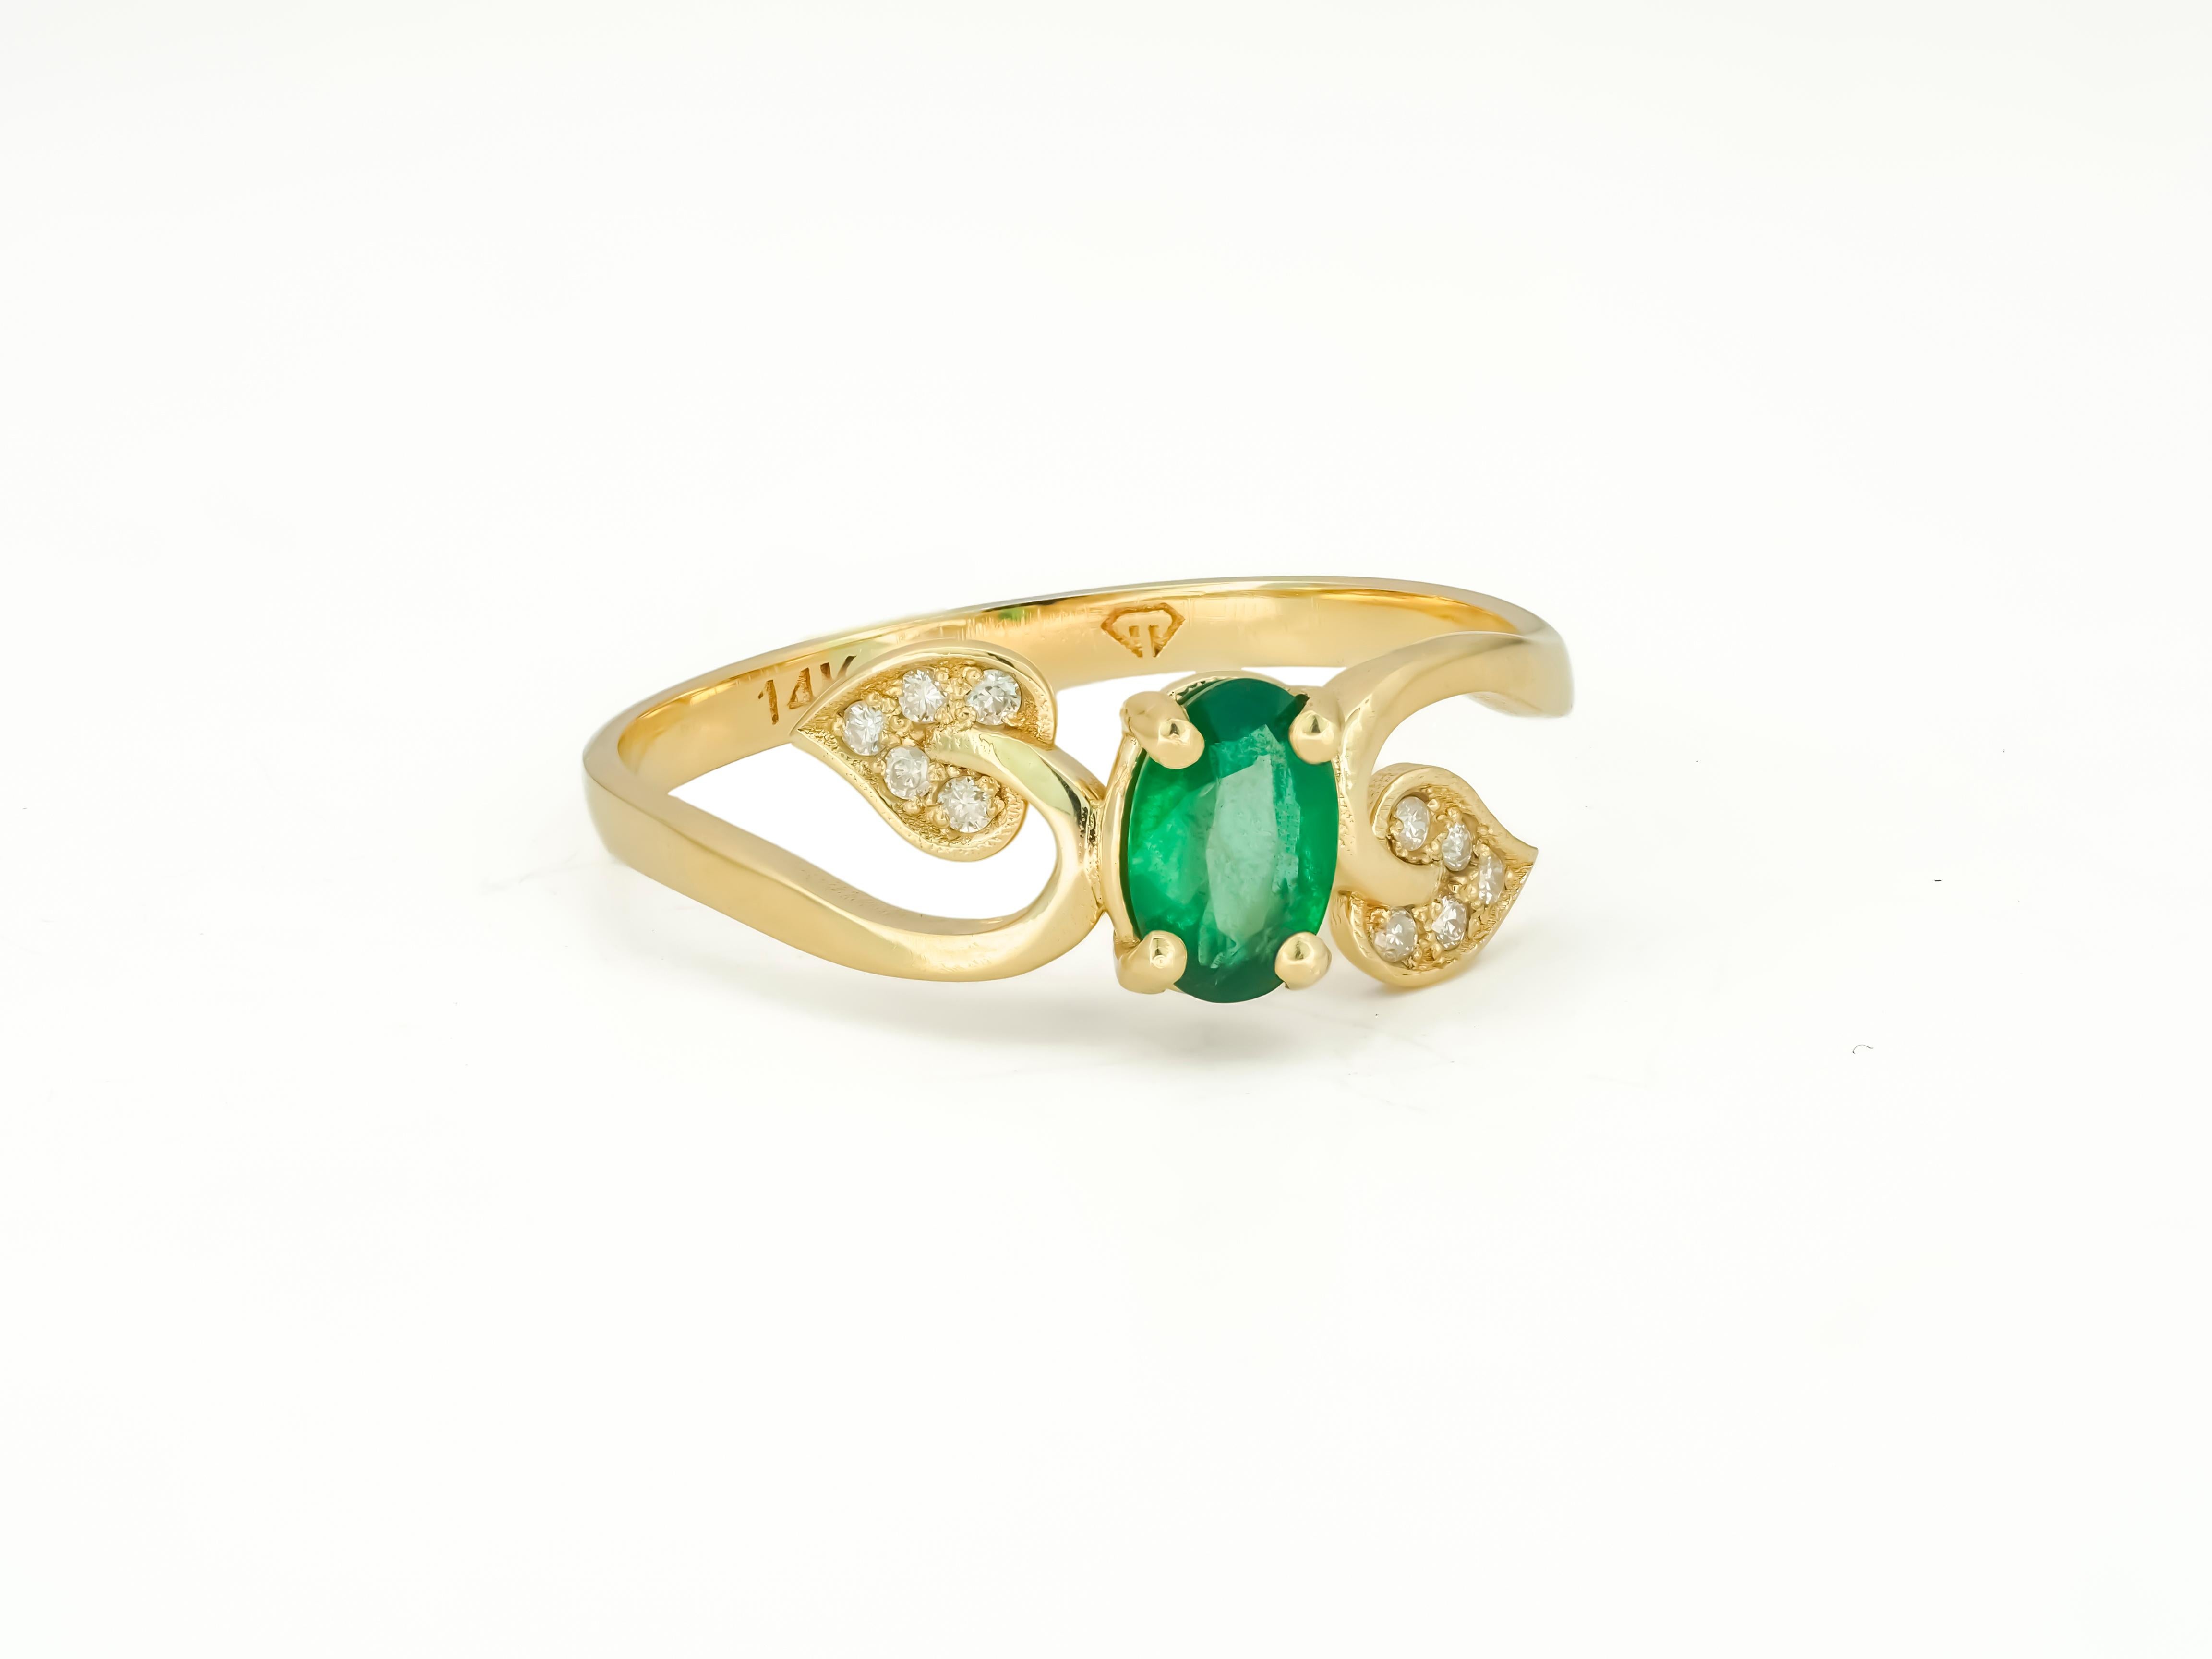 Oval Cut Genuine Emerald 14k Gold Ring, Emerald Engagement Ring For Sale